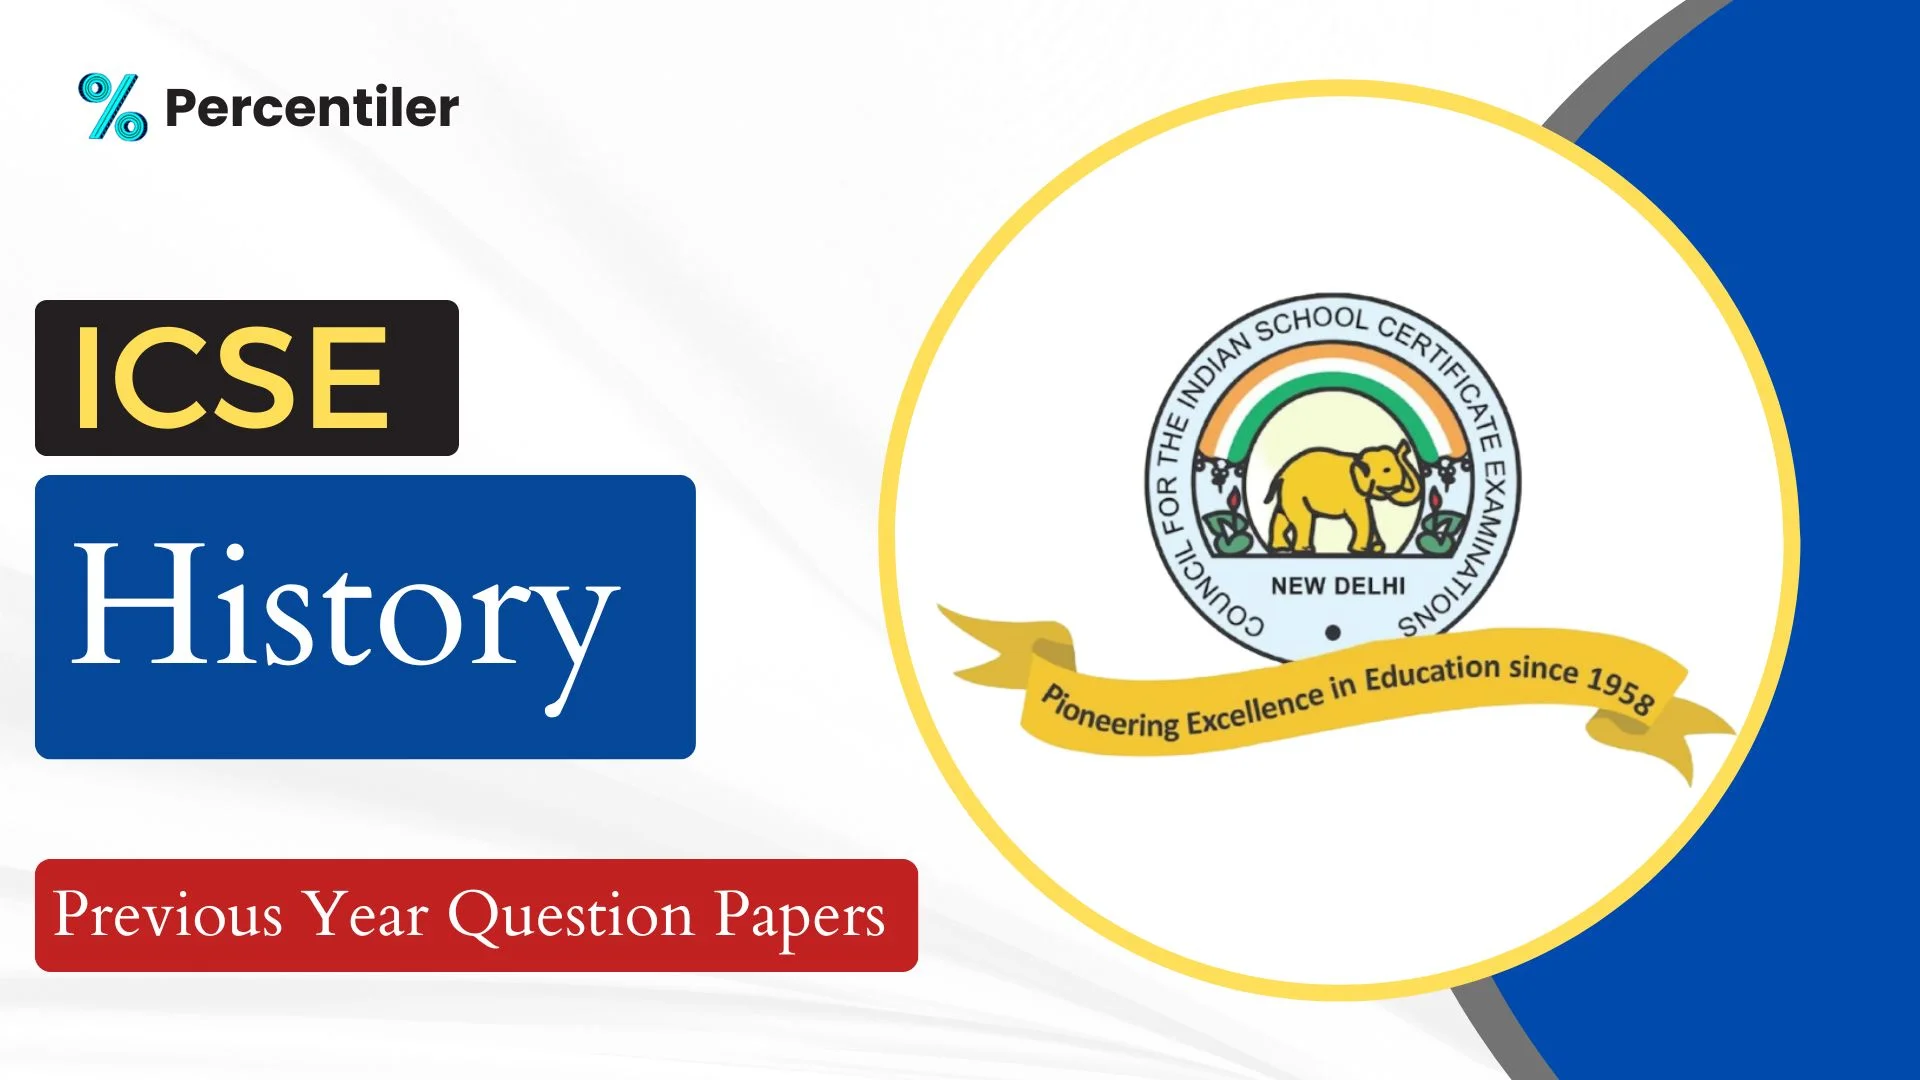 ICSE History Previous Year Question Papers